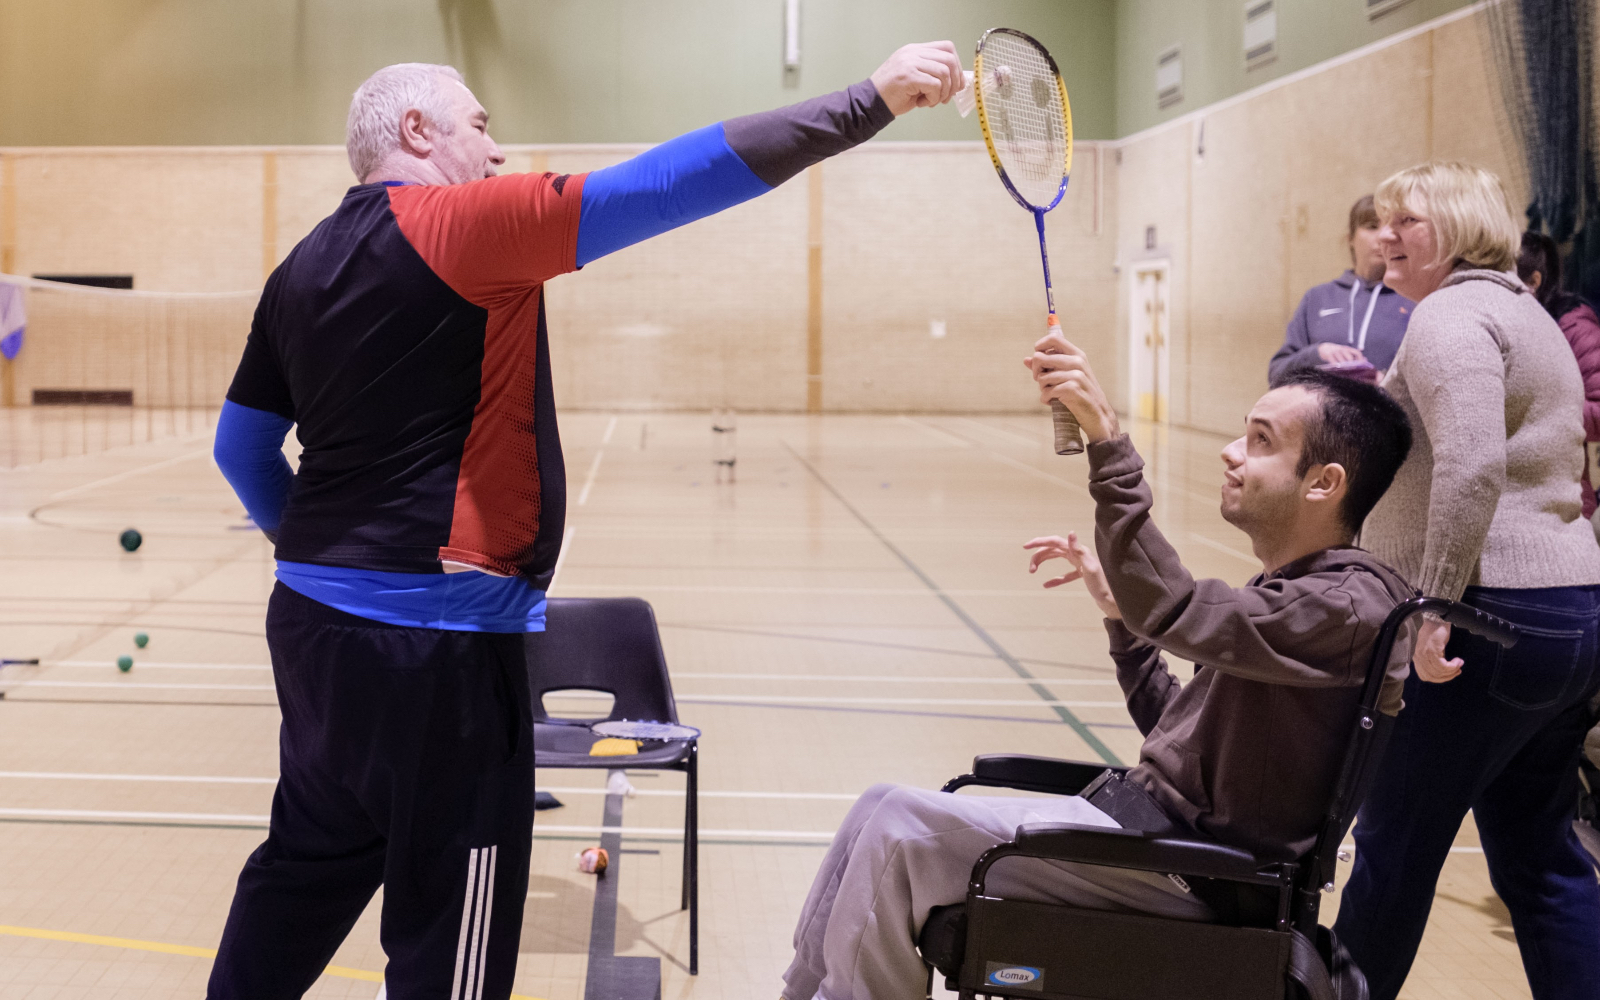 Badminton reinvented for people with complex disabilities | Badminton England